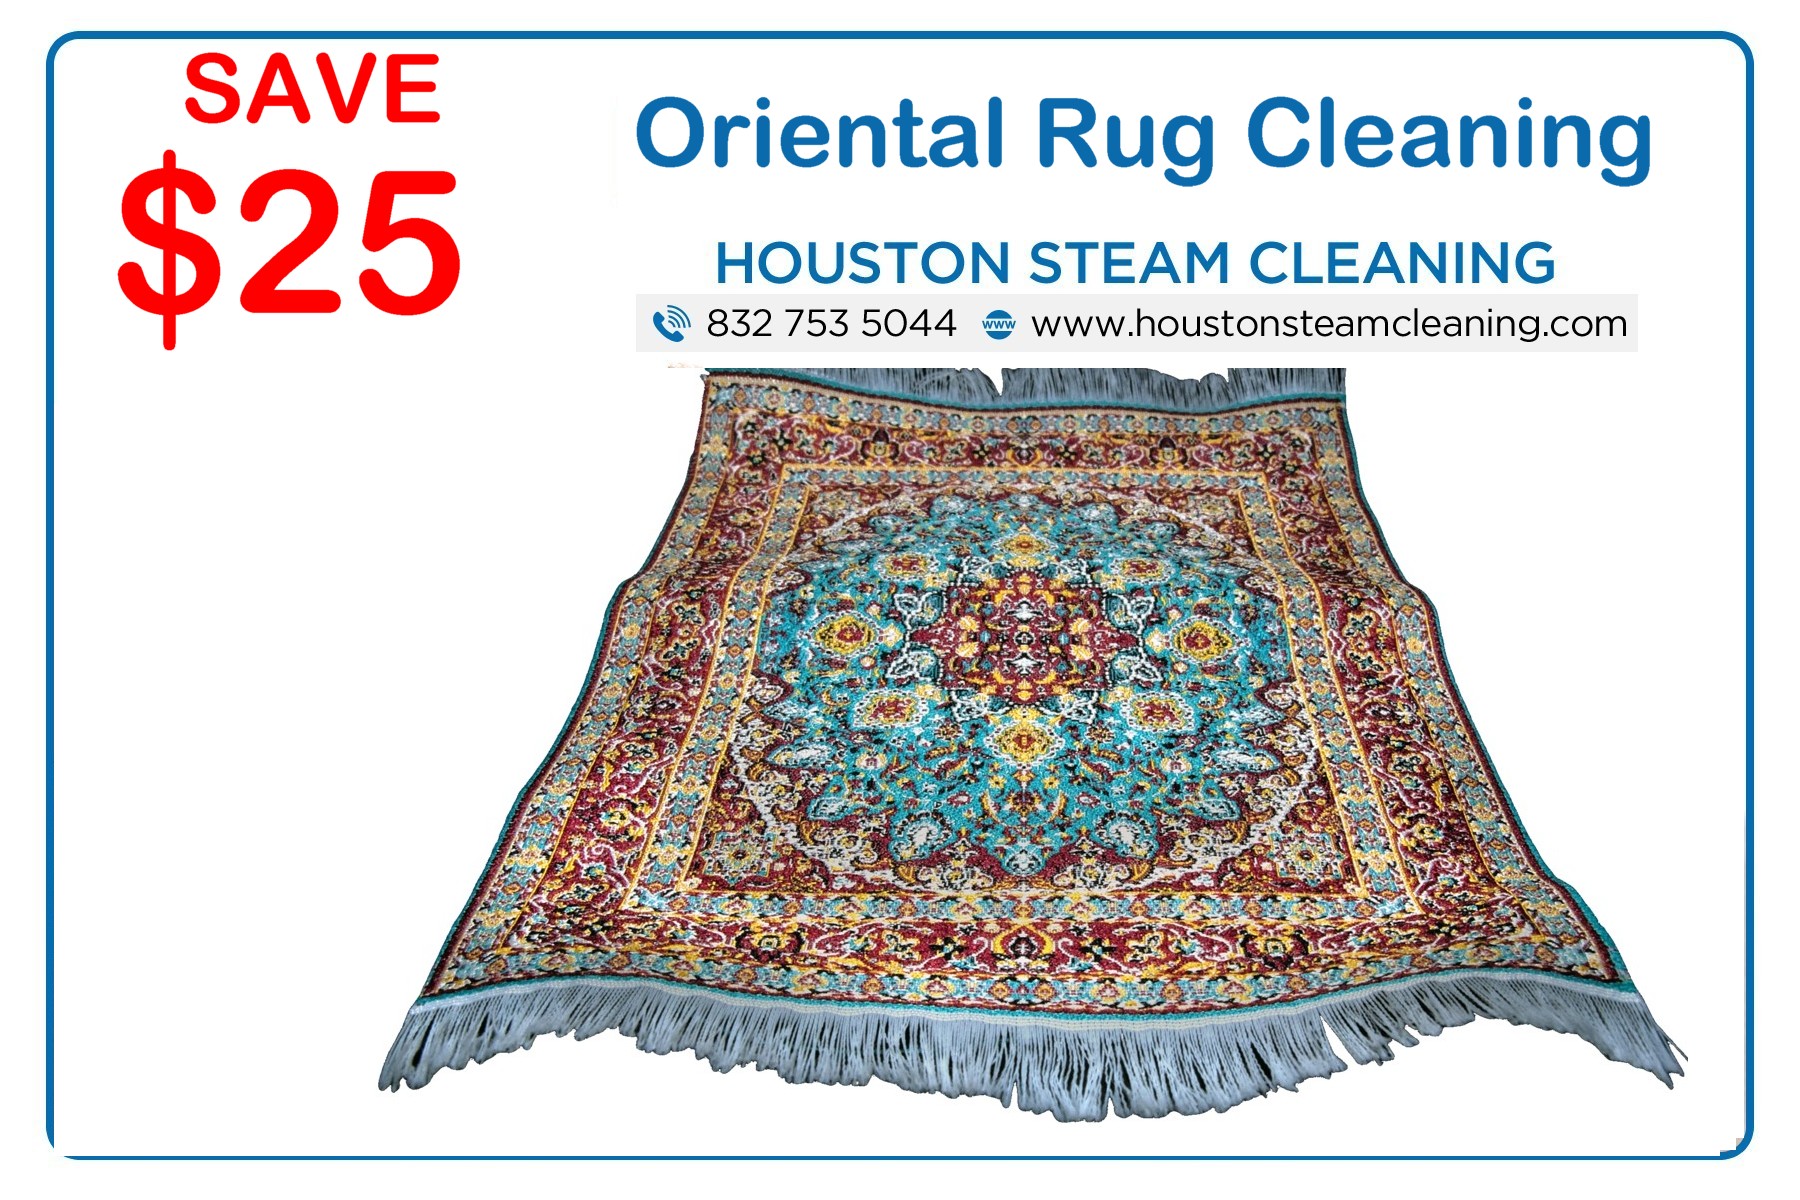 $25 off oriental rug cleaning